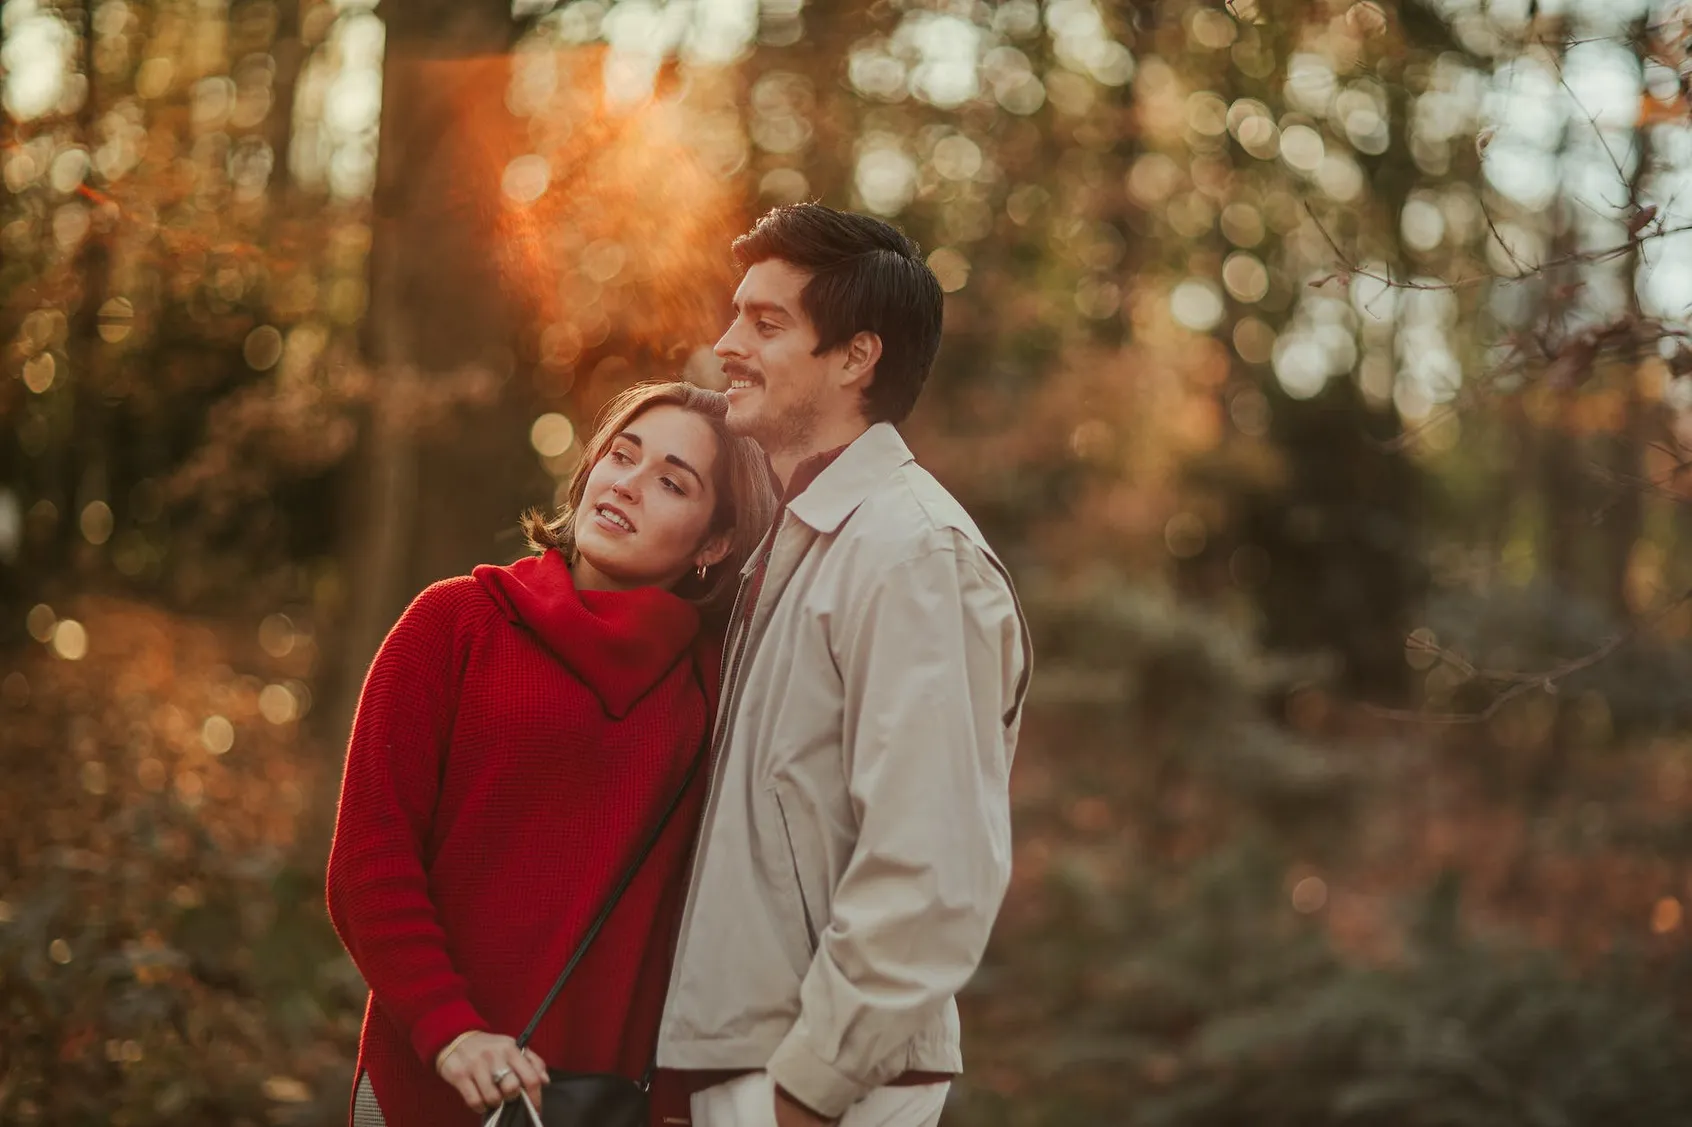 Can You Control Who You Fall In Love With? A Look At The Power Of Love